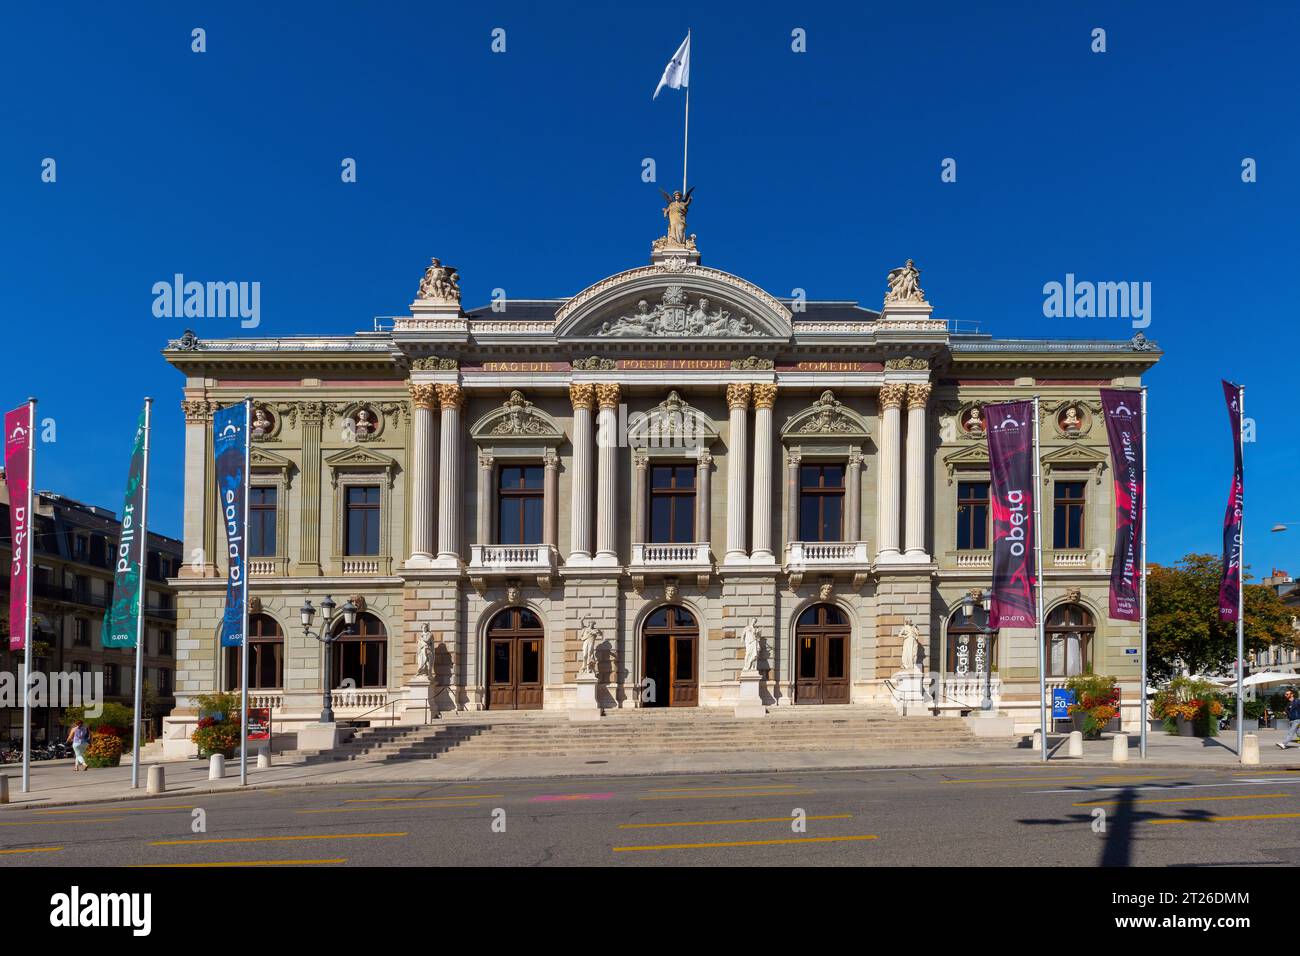 Grand Théâtre de Genève located by Place Neuve in Geneva. It  is an opera house officially opened in 1876. Canton of Geneva, Switzerland. Stock Photo